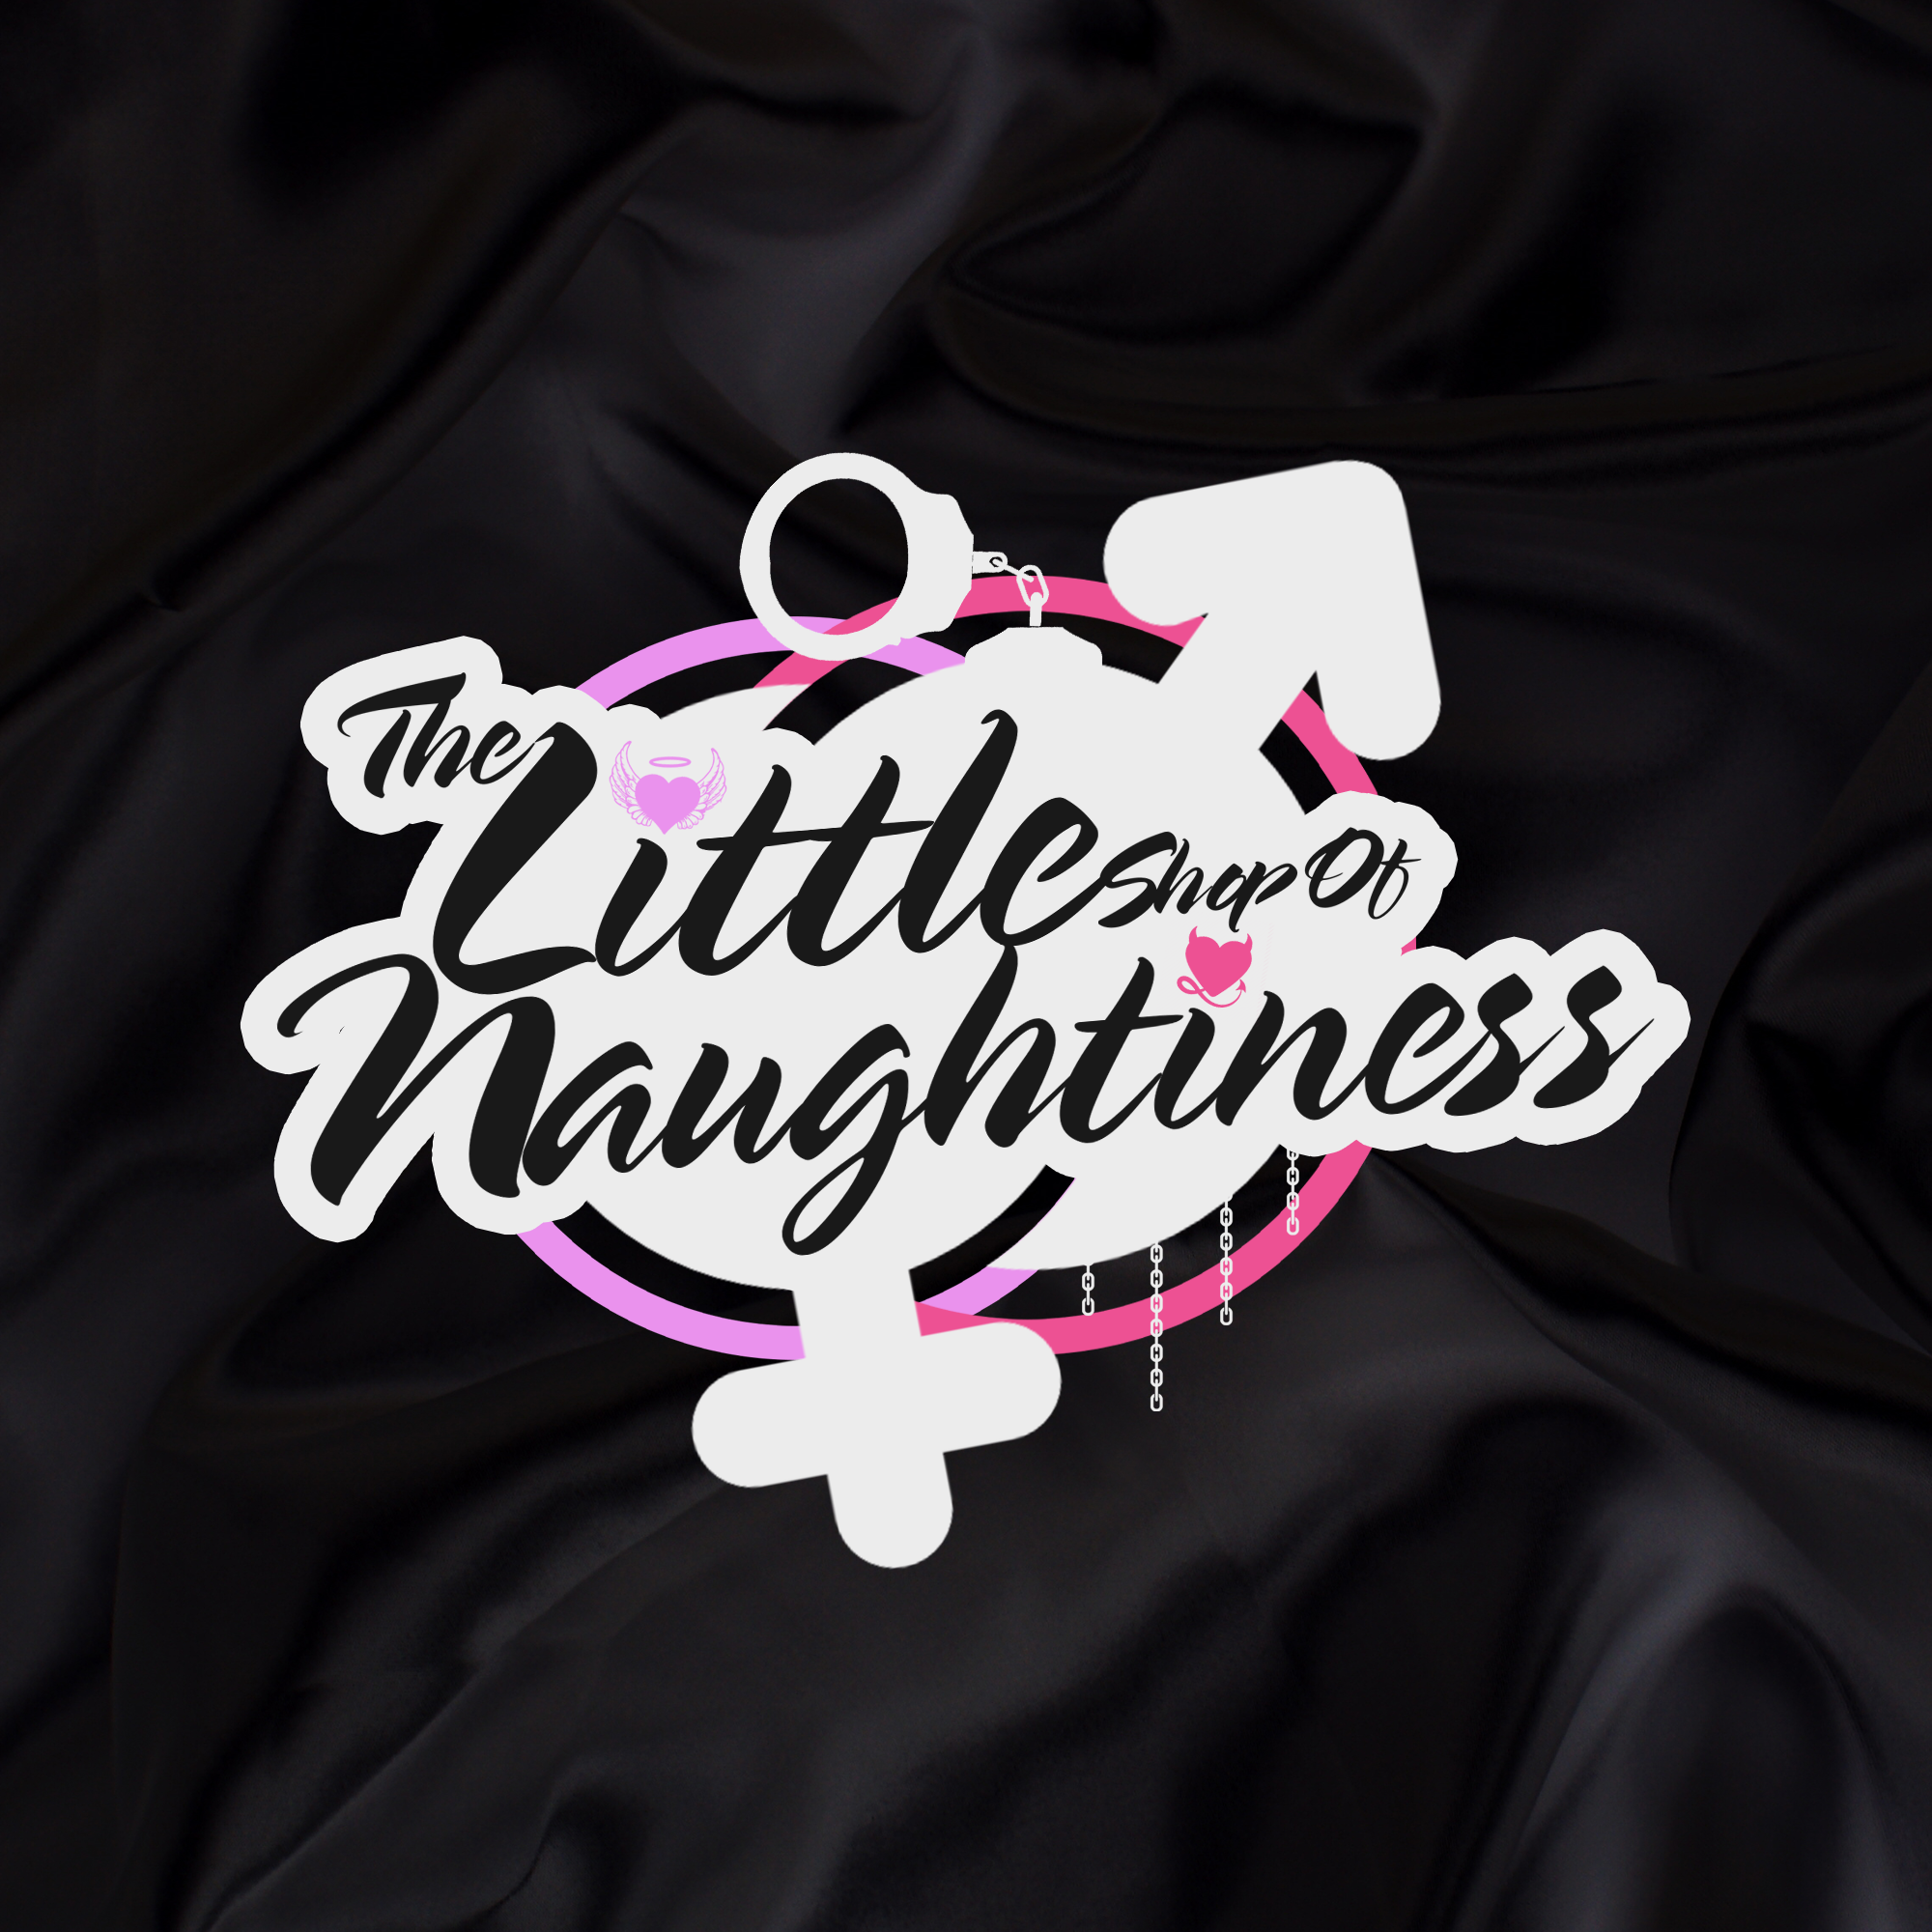 The Little Shop of Naughtiness Fantasy Kits